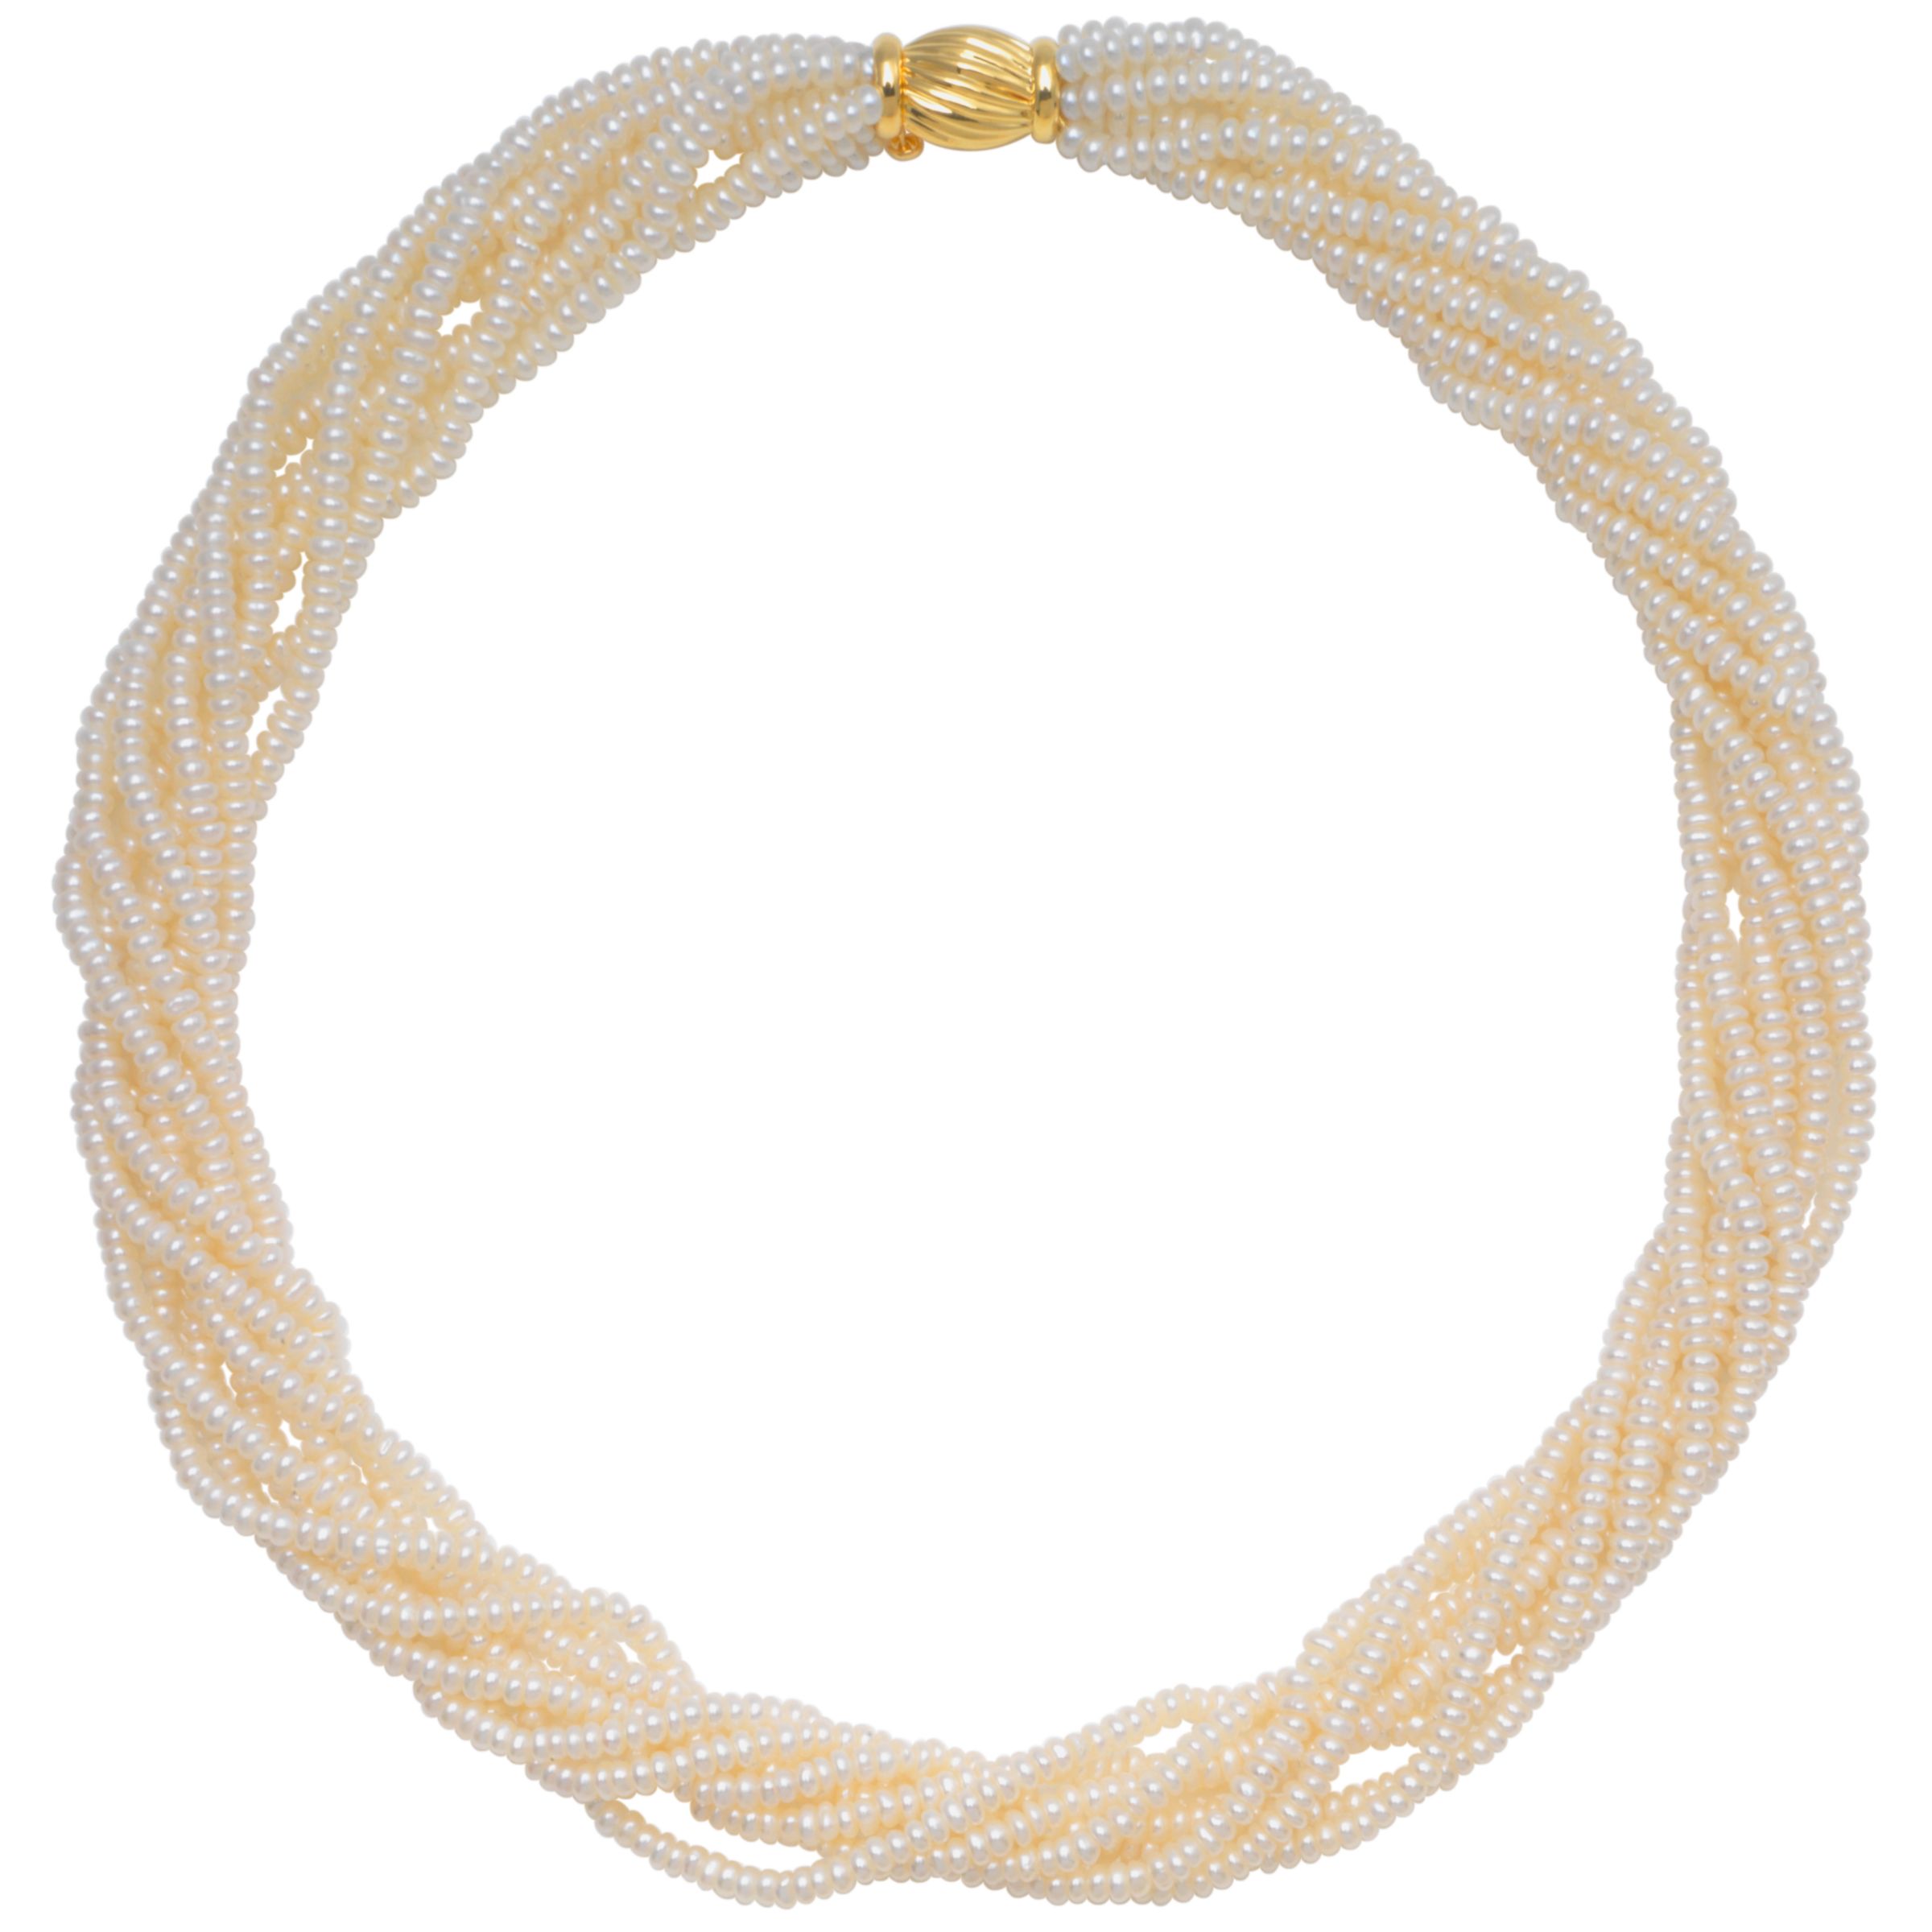 Freshwater Pearl Multi Twist 18" Necklace with Gold Clasp at John Lewis